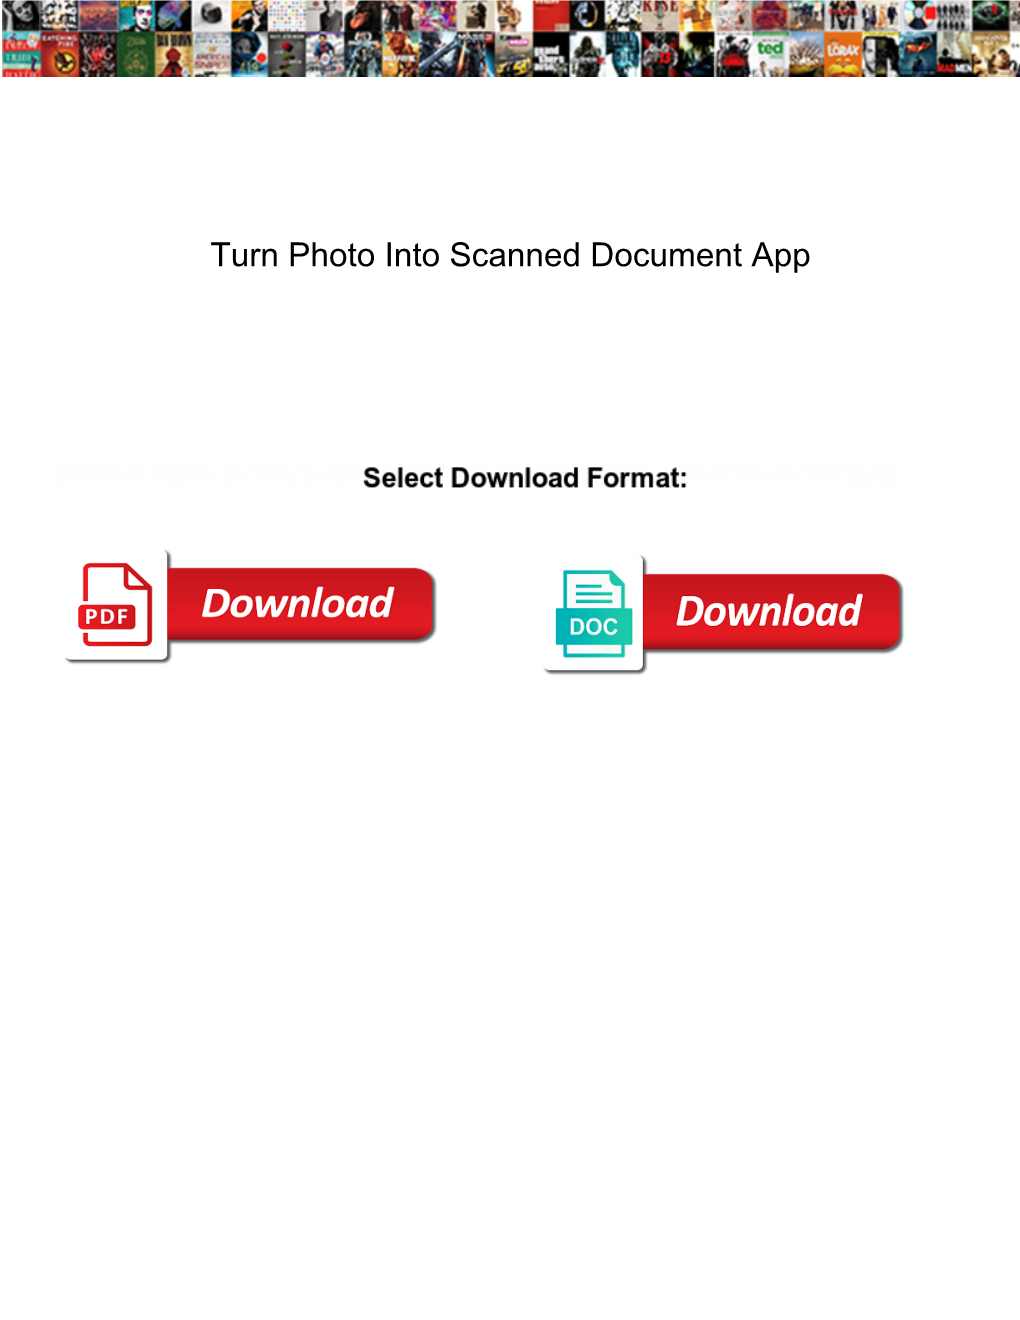 Turn Photo Into Scanned Document App